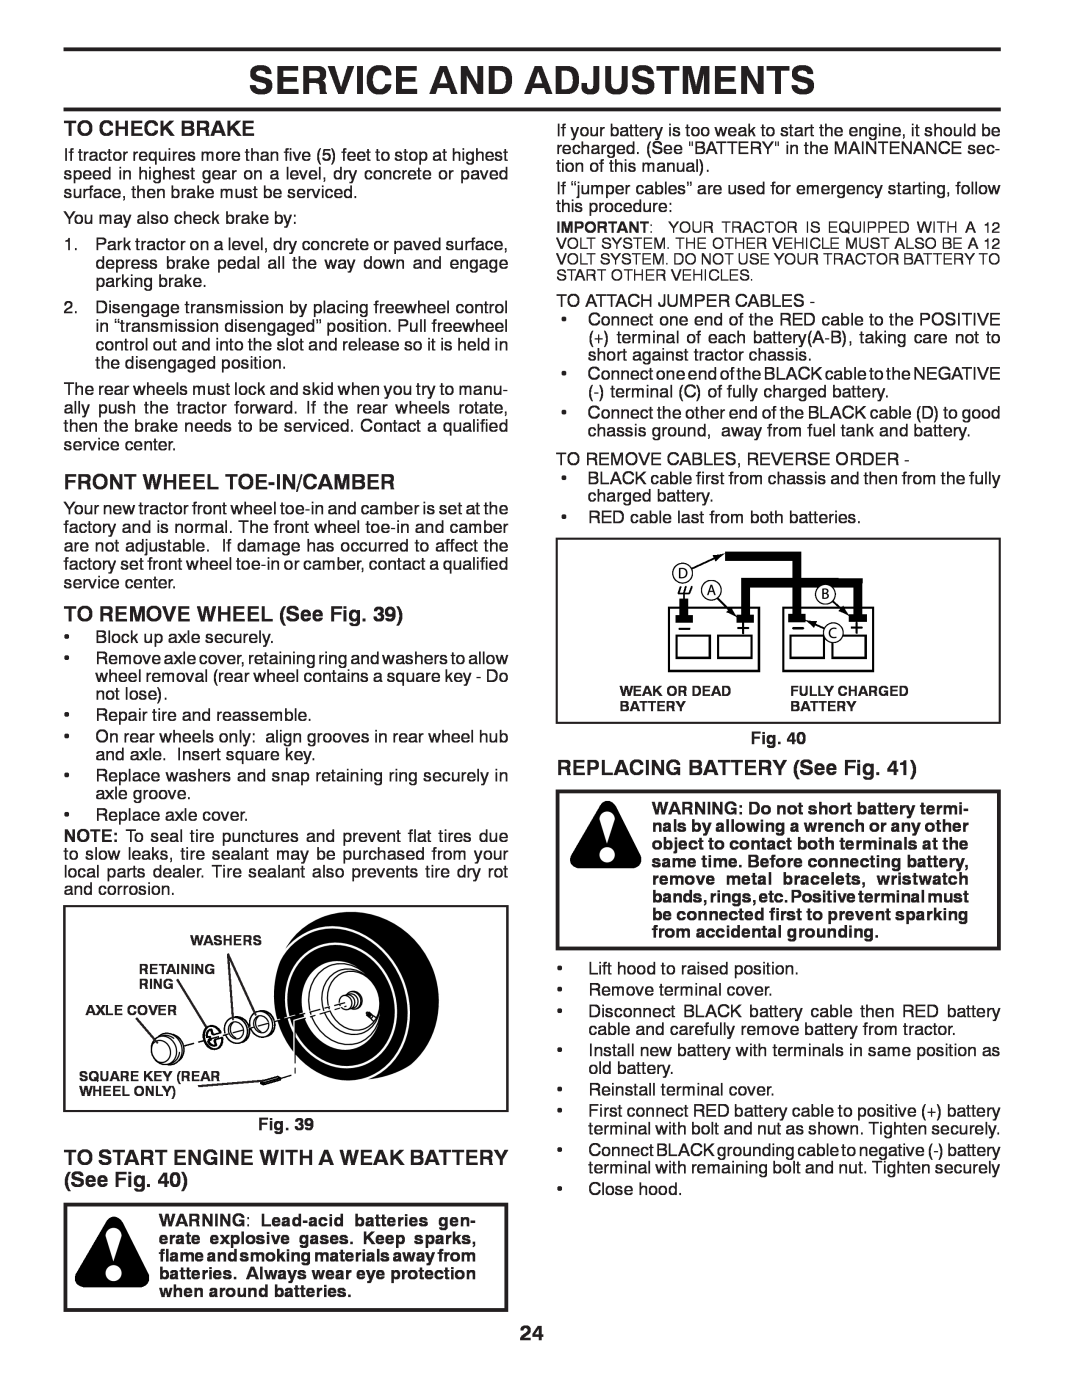 Dixon D26KH54 manual To Check Brake, Front Wheel Toe-In/Camber, TO REMOVE WHEEL See Fig, REPLACING BATTERY See Fig 